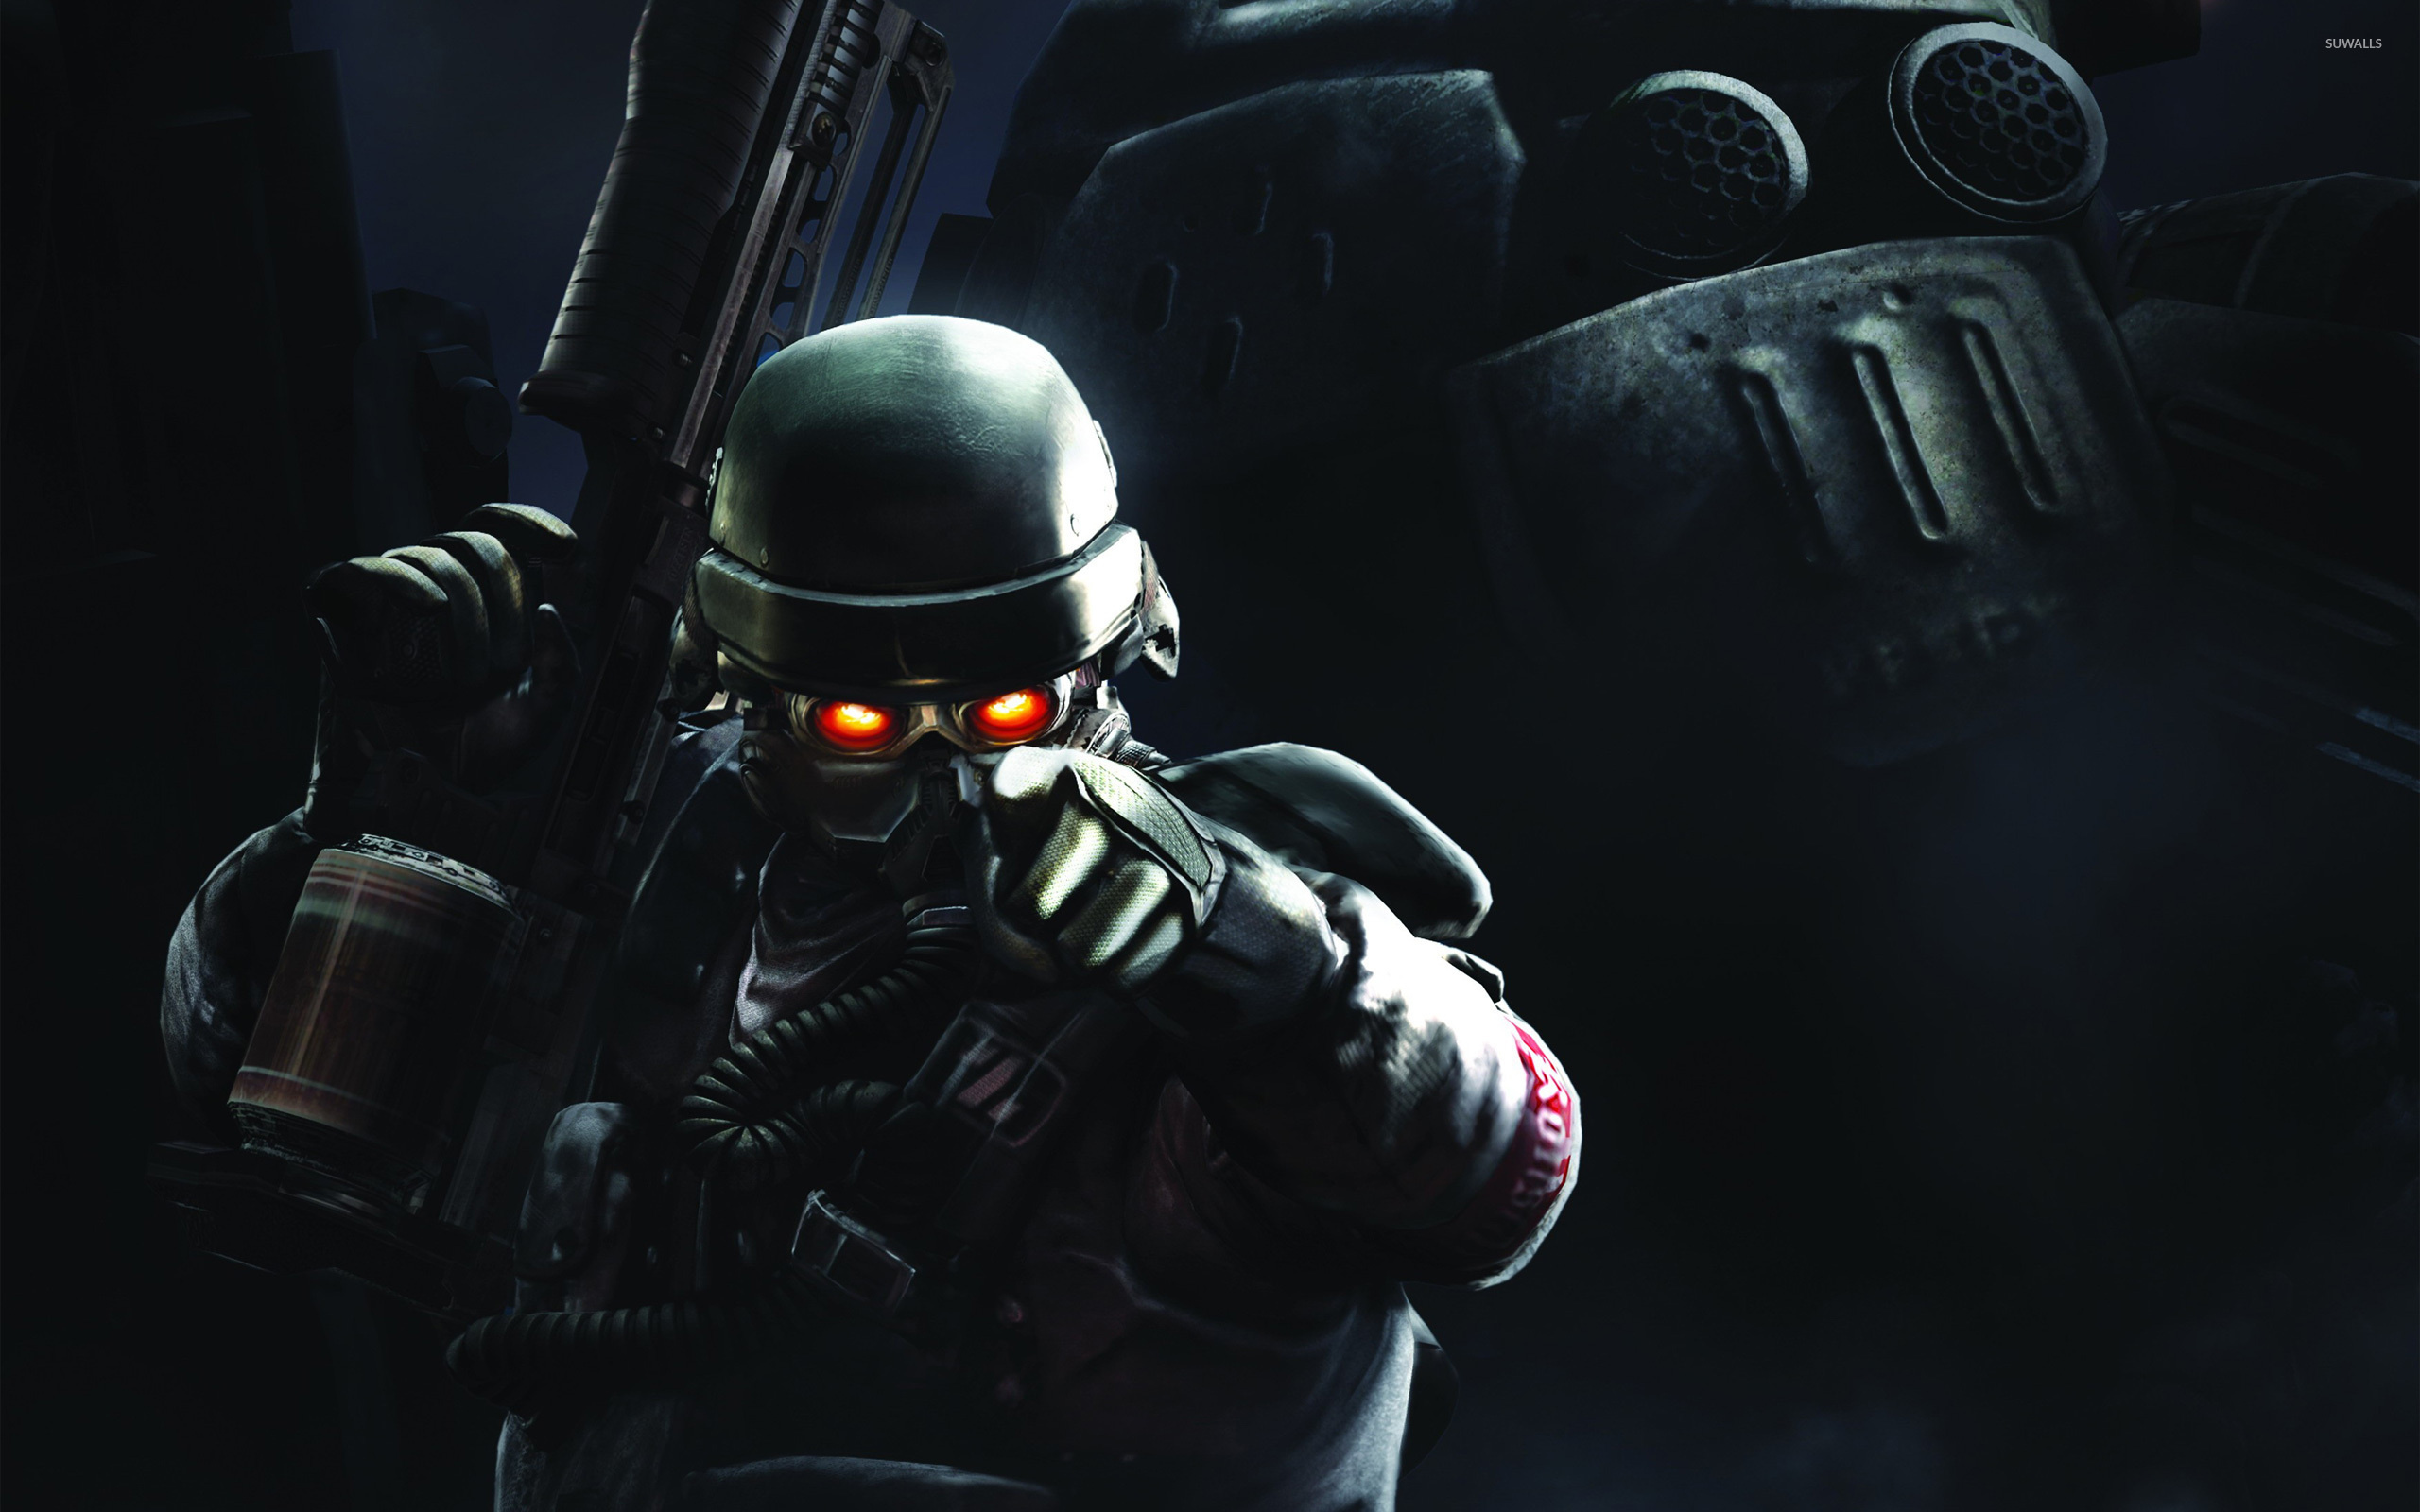 Killzone 3, Engaging game wallpaper, Action-packed gaming, High-quality imagery, 2560x1600 HD Desktop